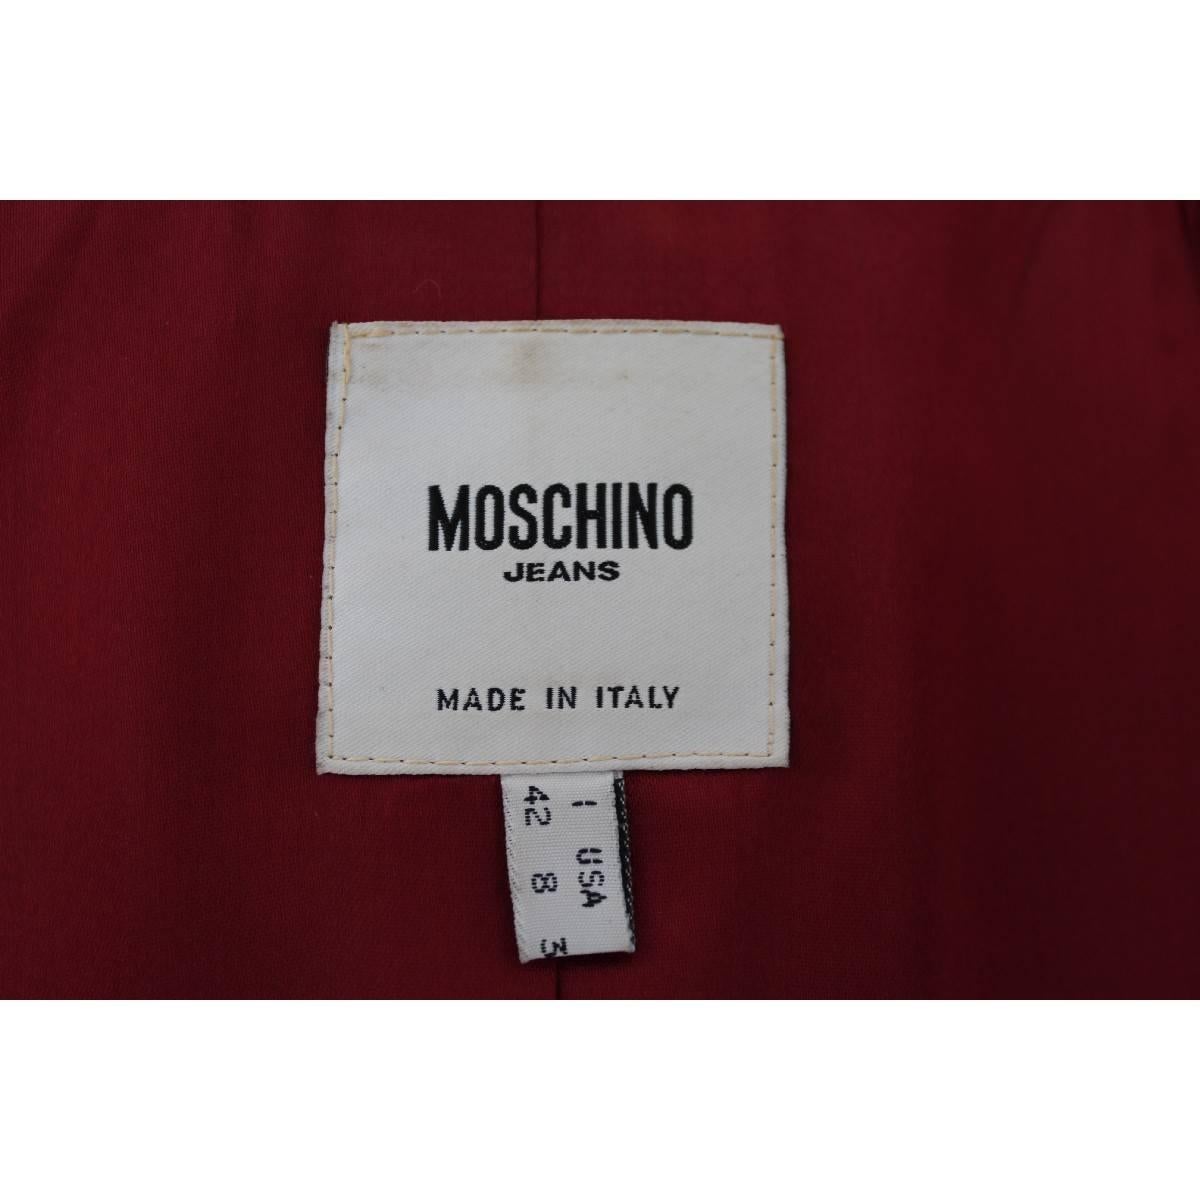 Moschino 1990s vintage red wool blend long coat slim fit  1